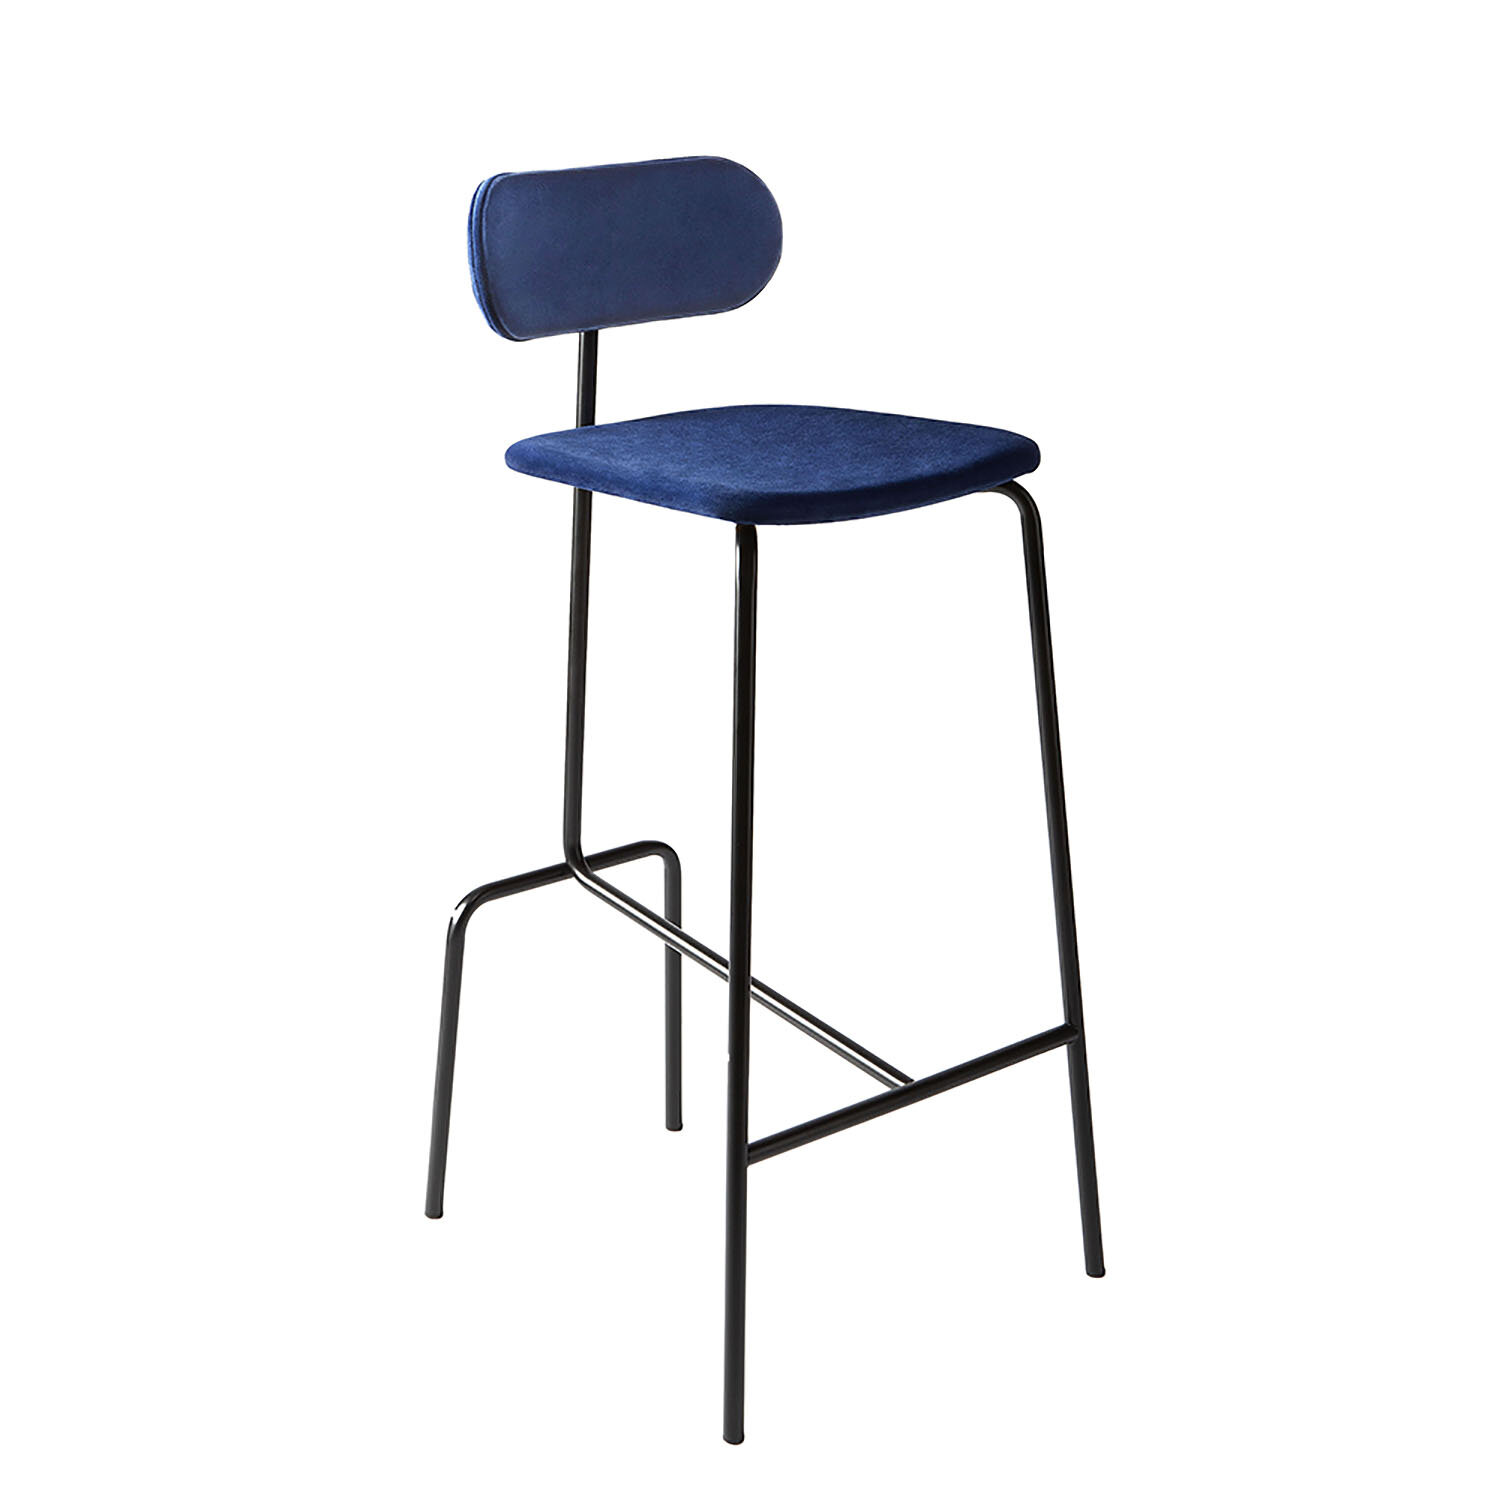 The Stool - upholstered